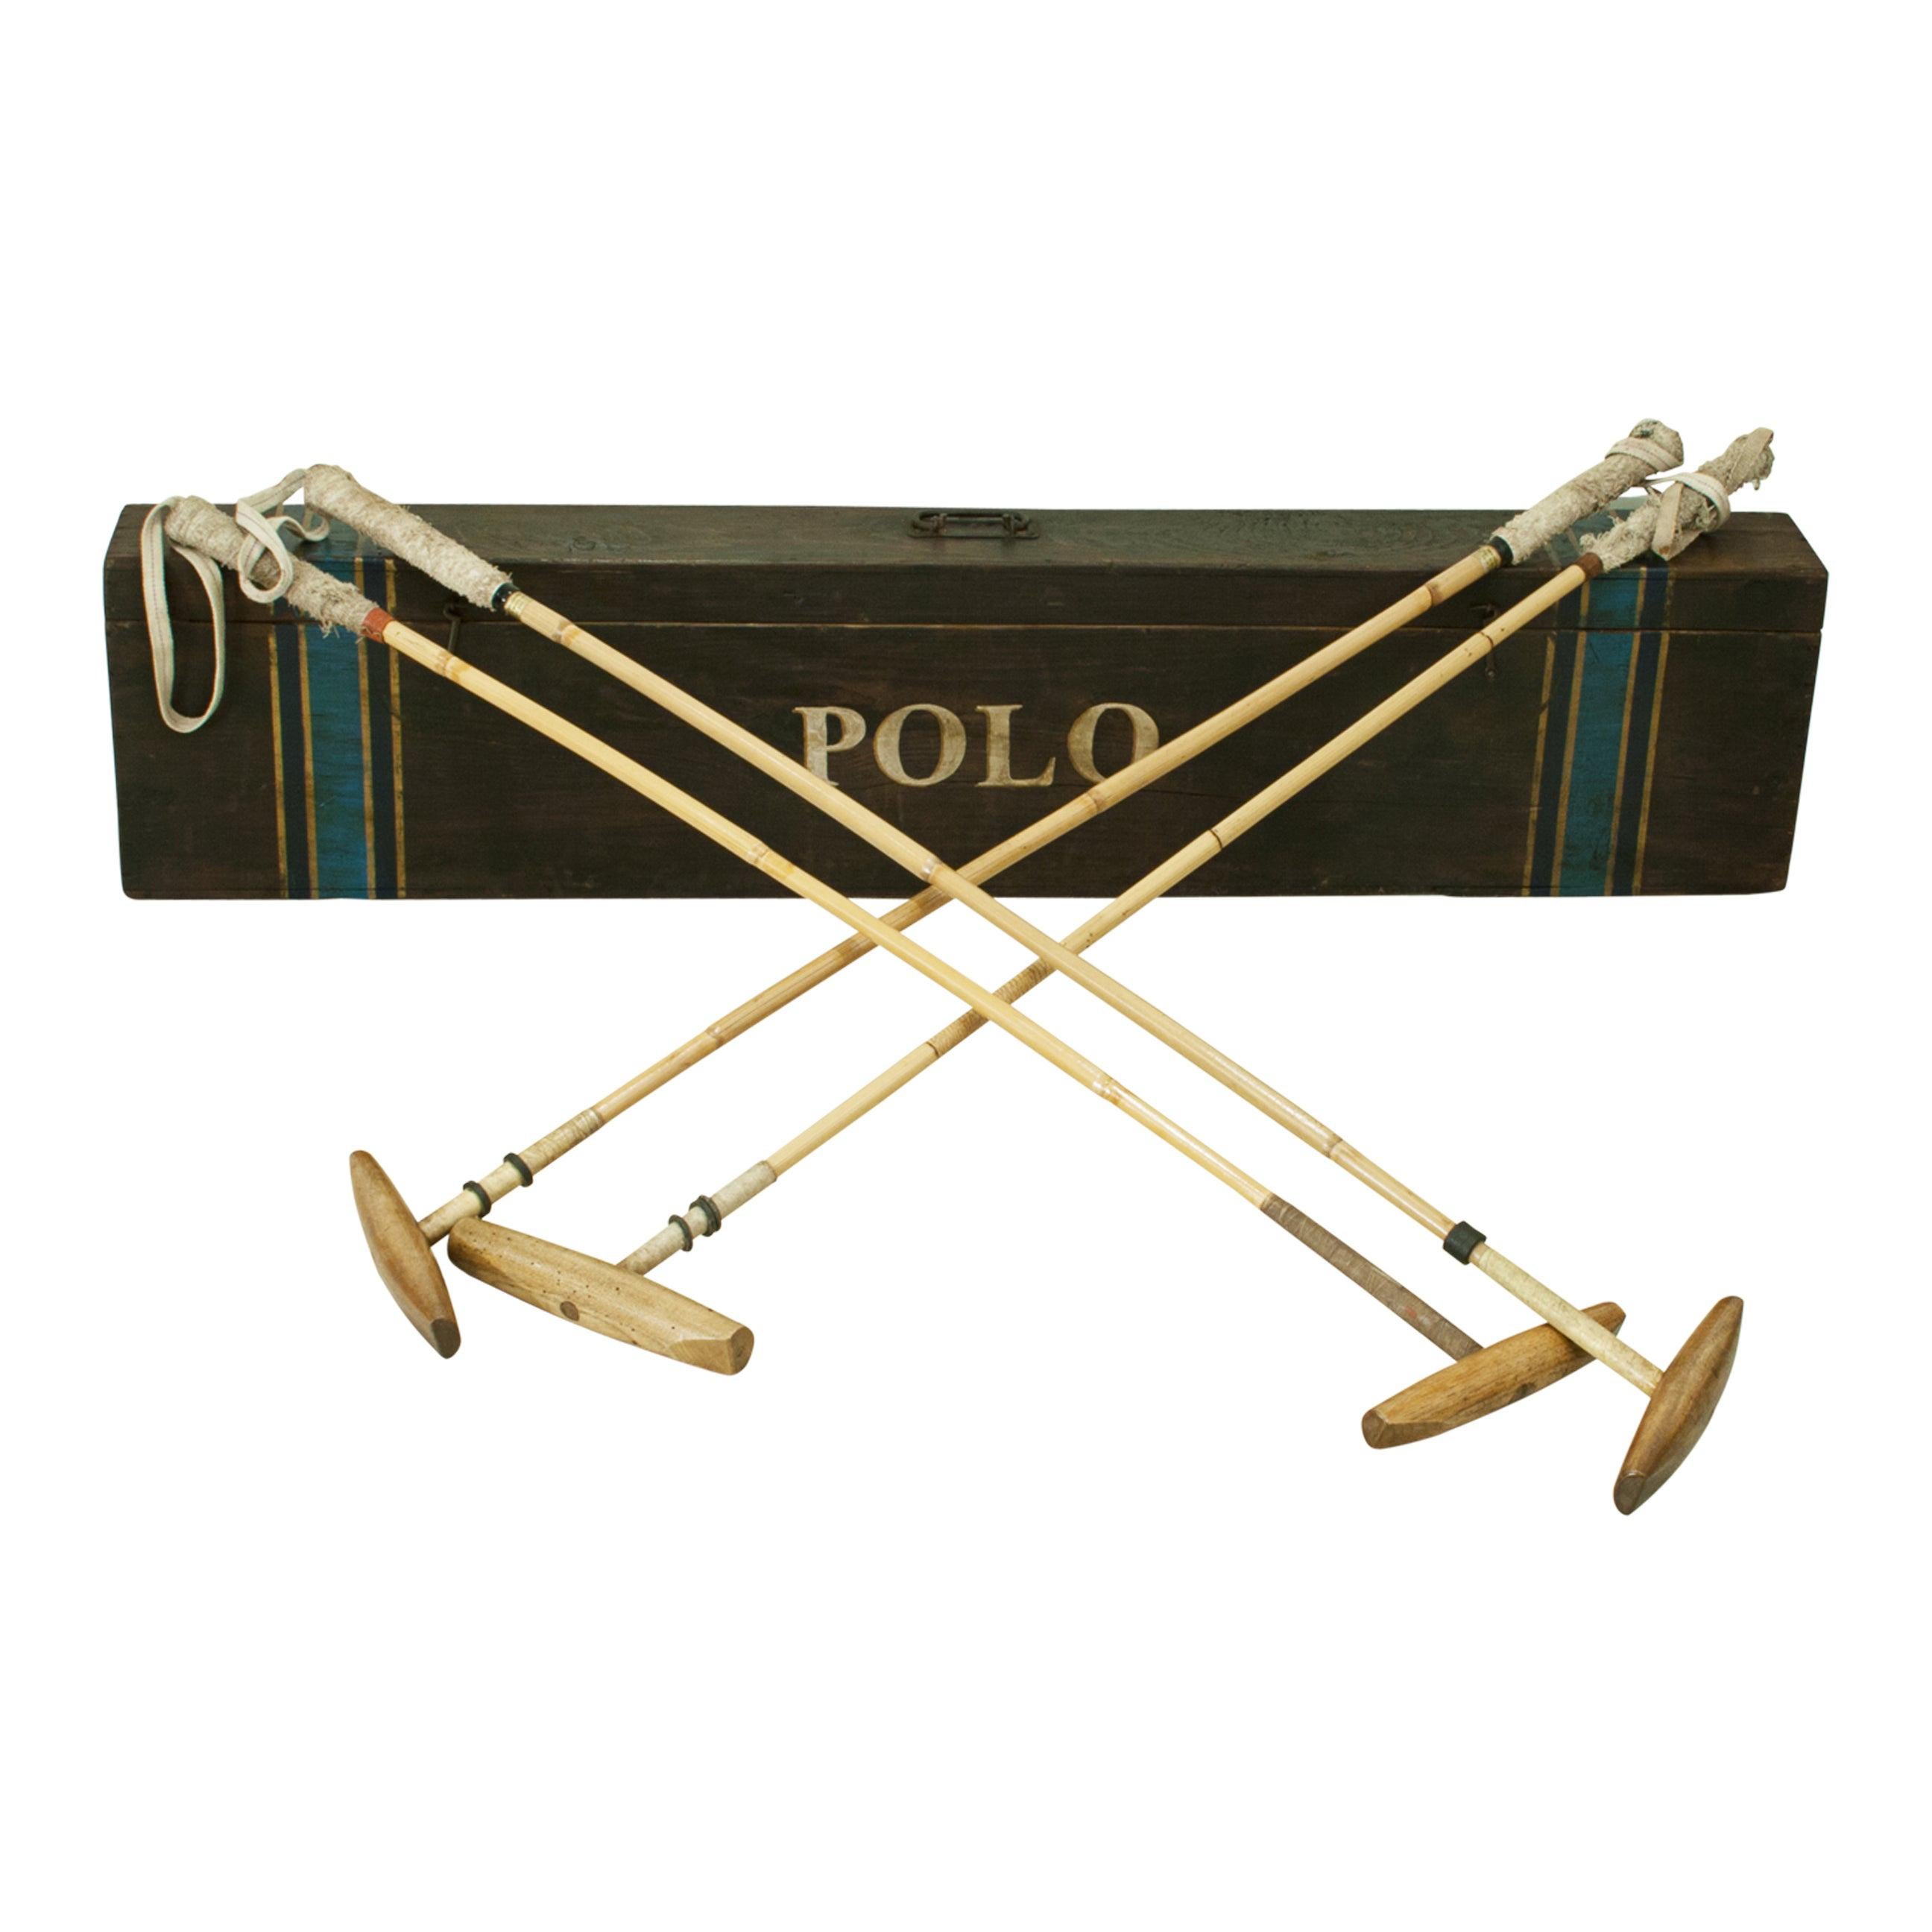 Vintage Polo Mallets in Pine Polo Mallet Travel Box